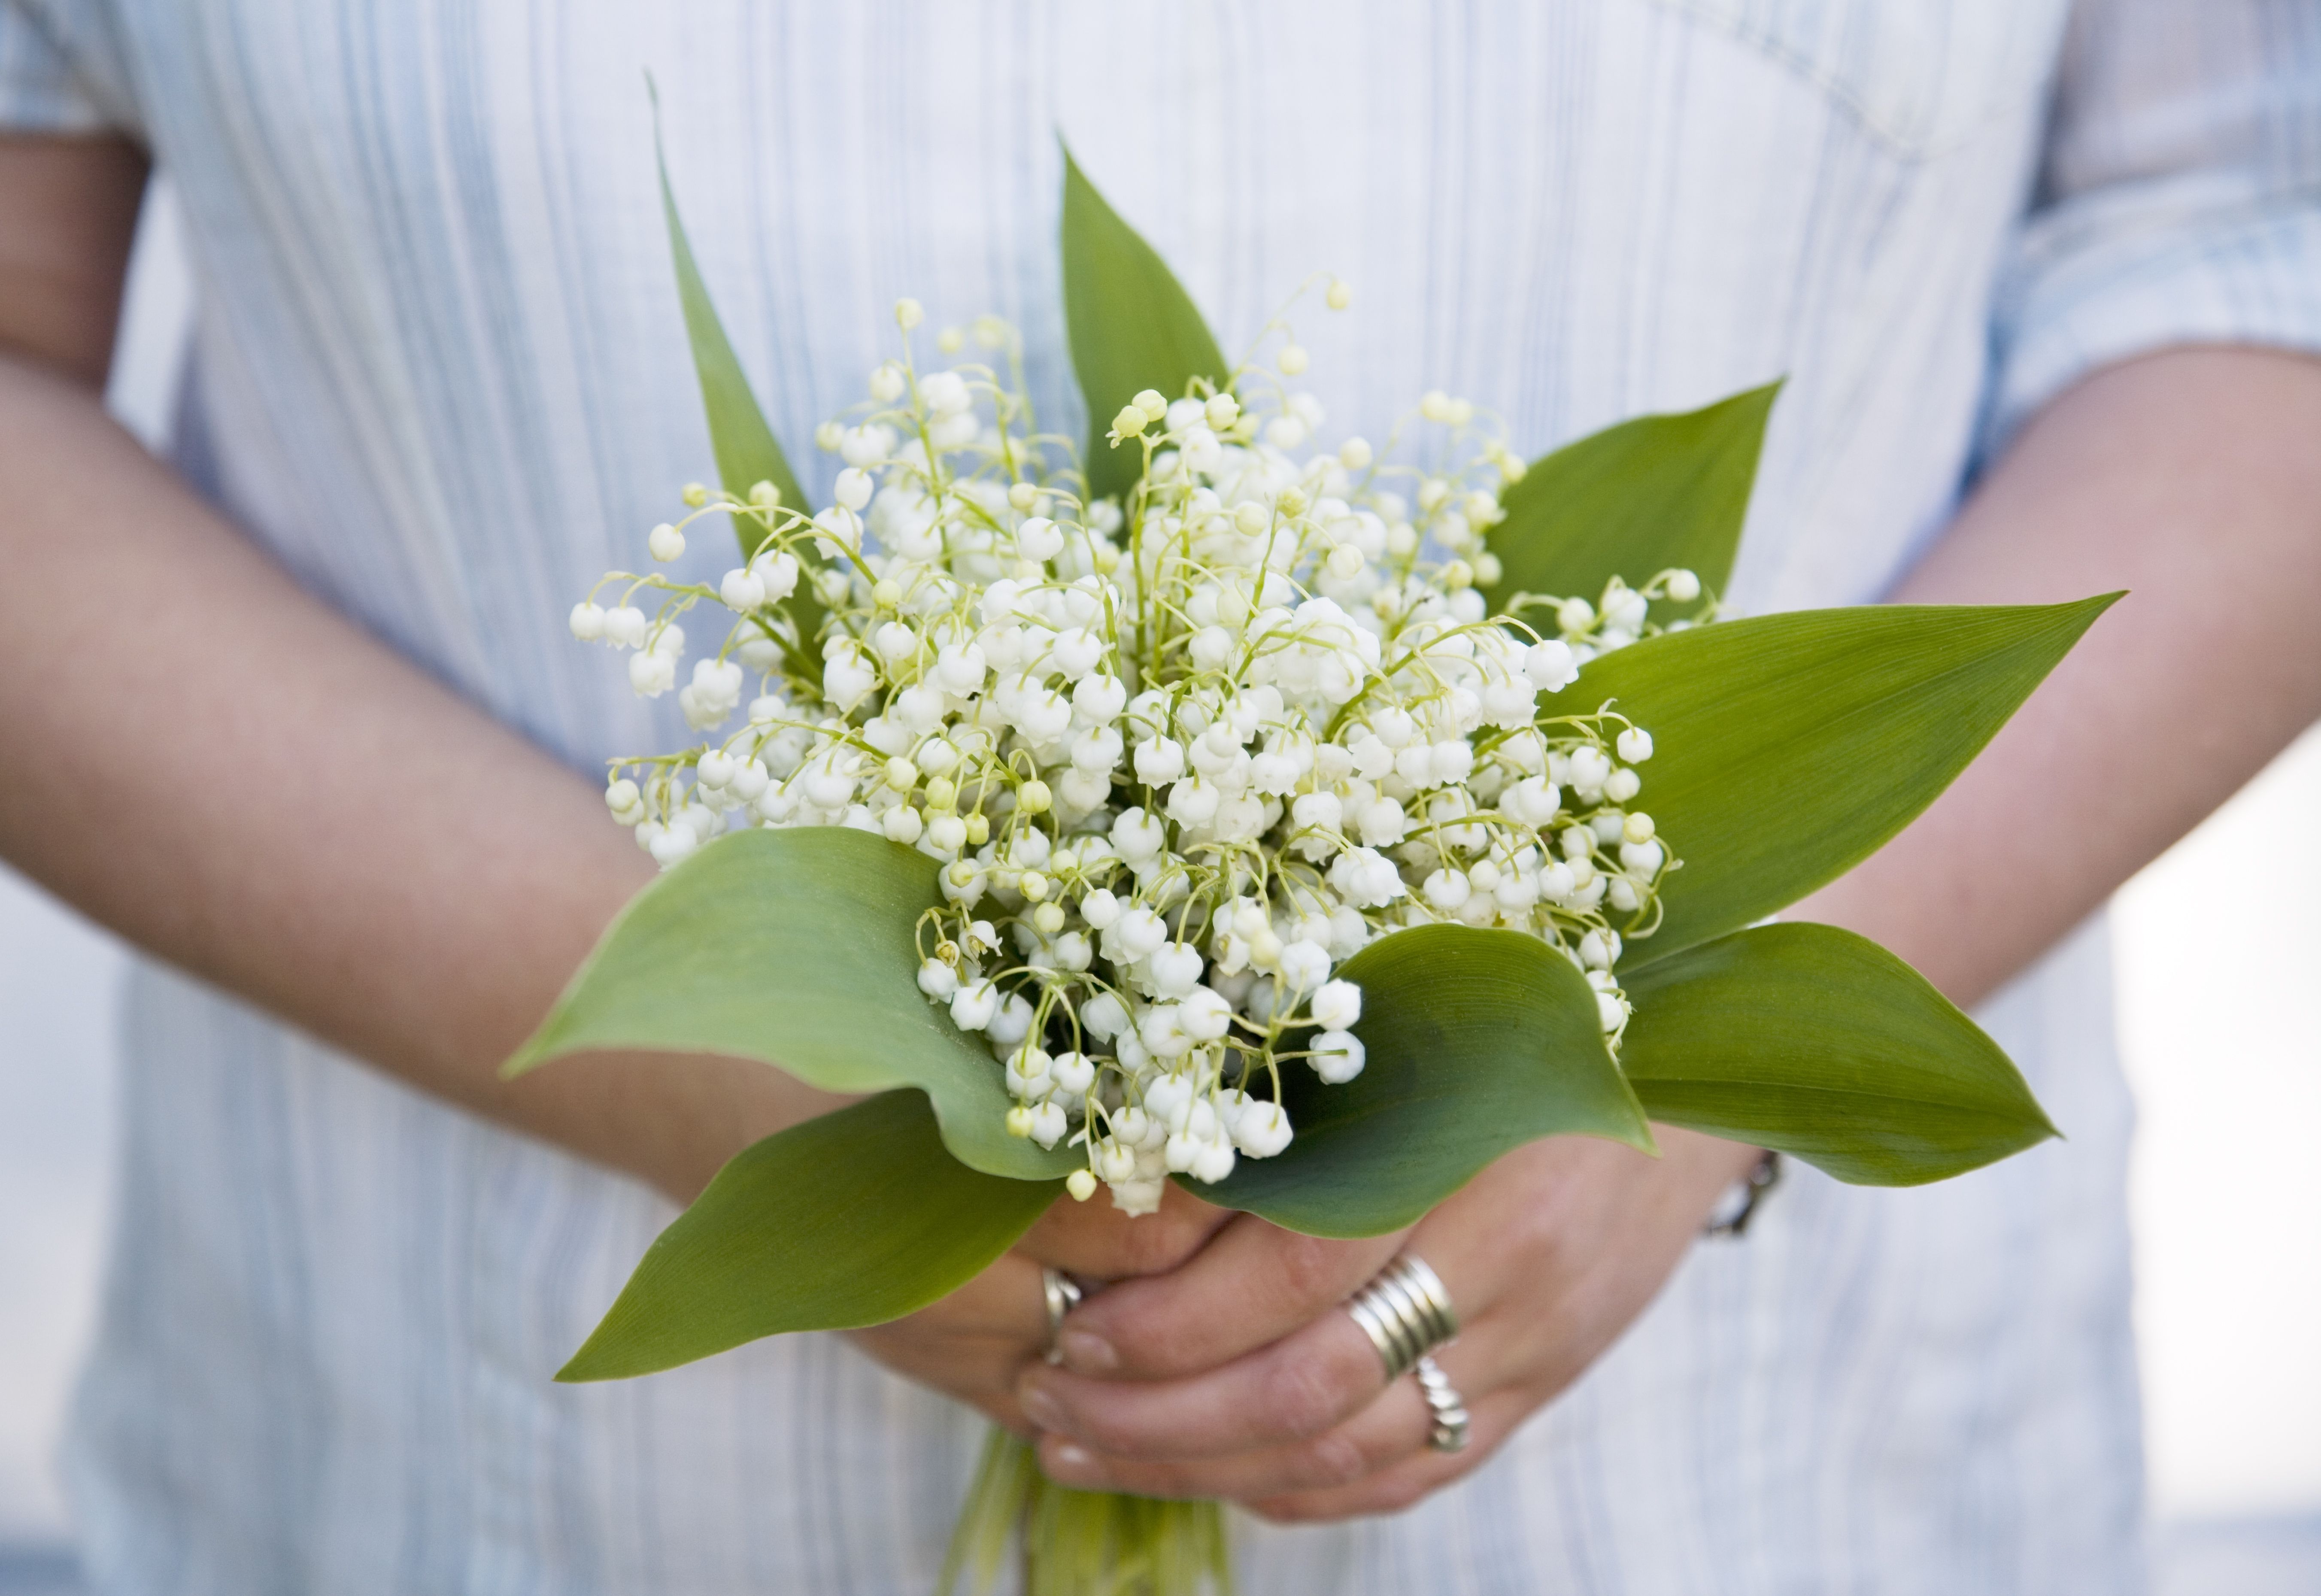 Lily of the Valley Meaning, Symbolism and Connection to the Queen